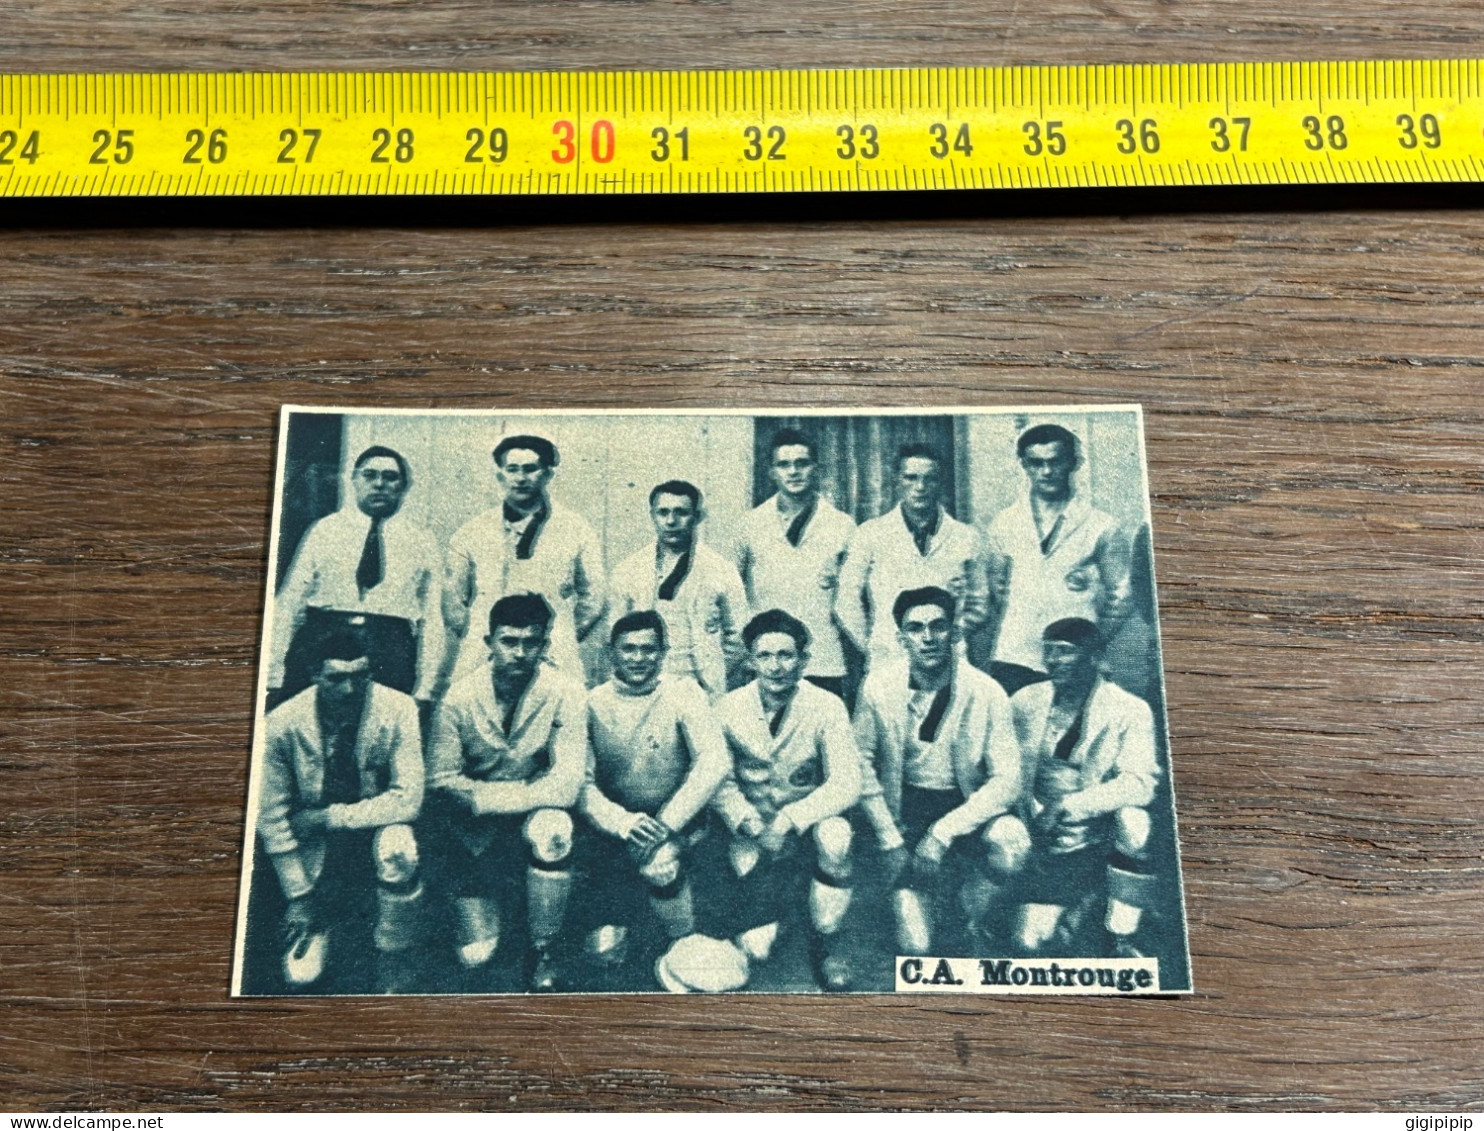 1928 MI équipe Football C.A. Montrouge - Collections